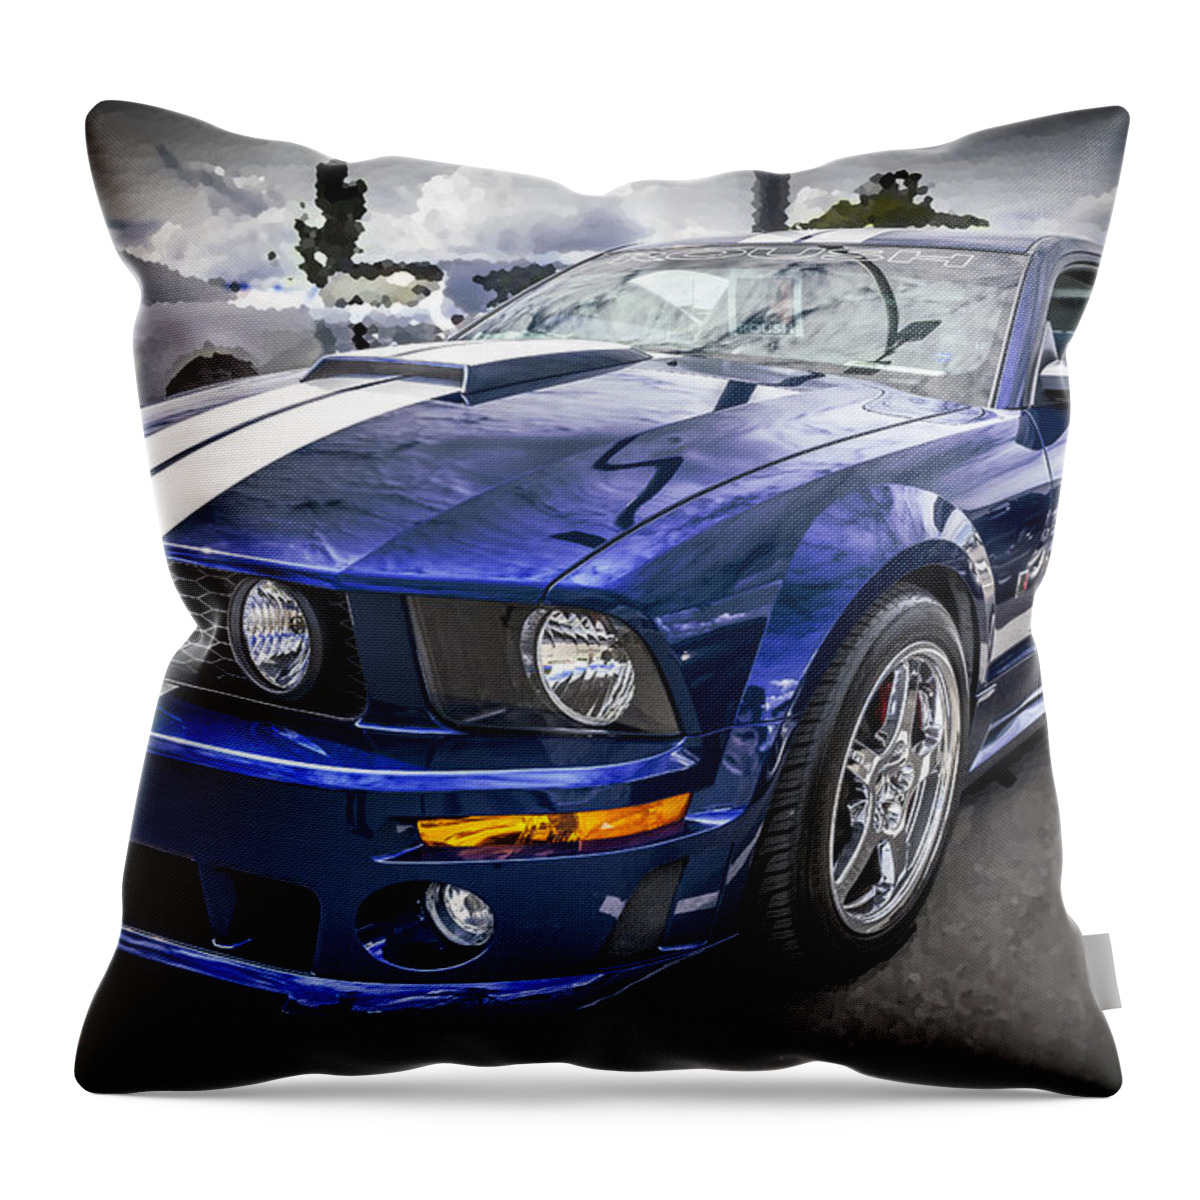 2008 Mustang Throw Pillow featuring the photograph 2008 Ford Shelby Mustang with the Roush Stage 2 Package by Rich Franco